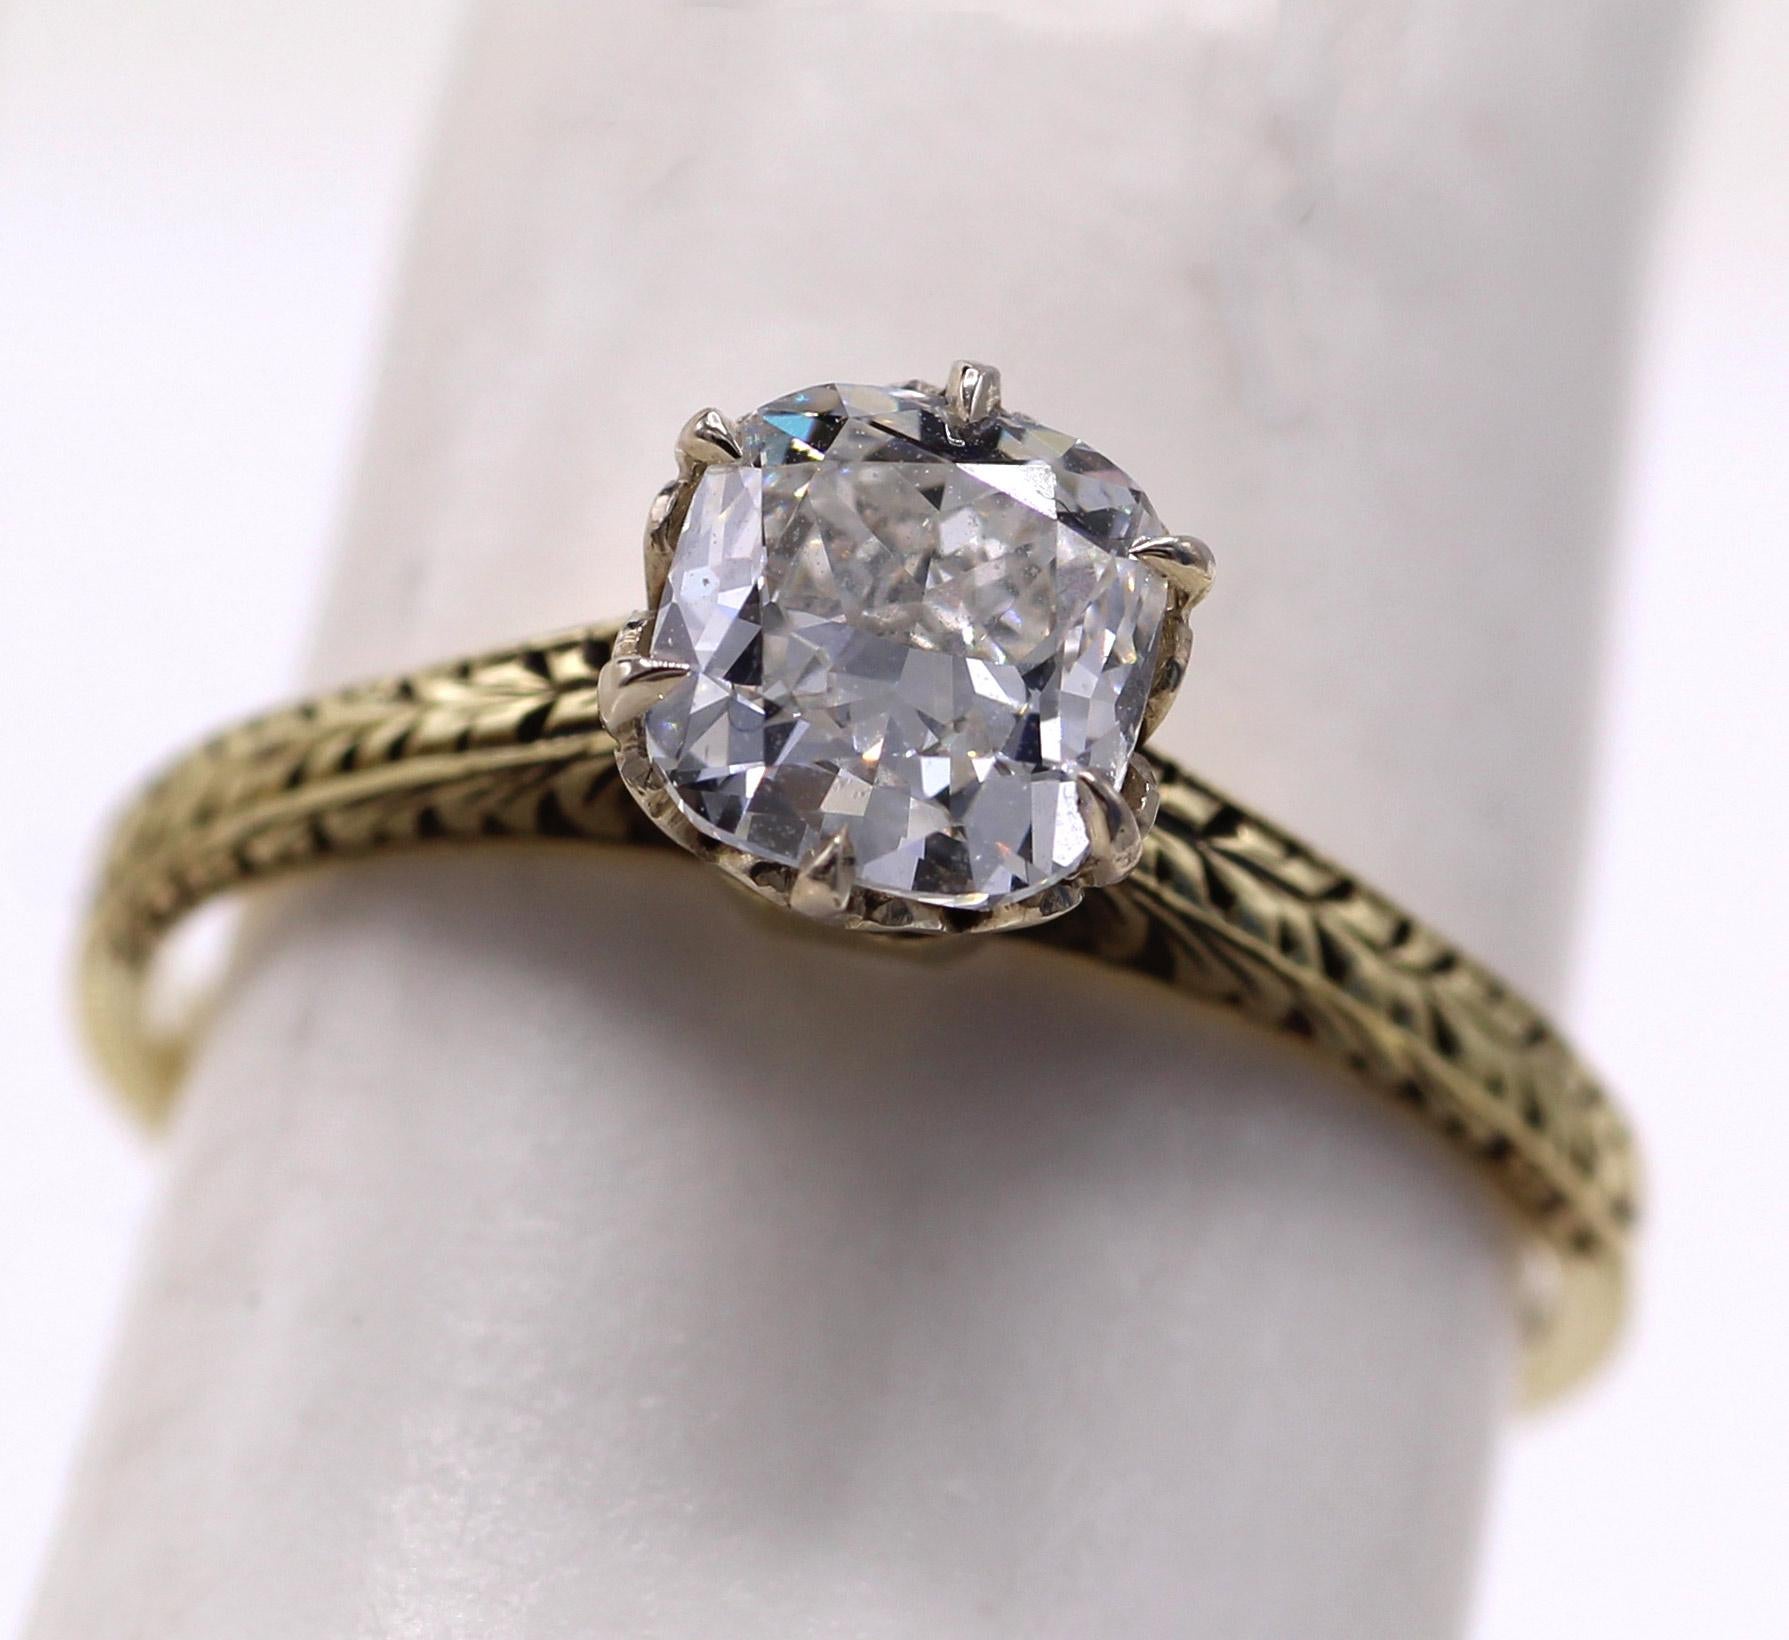 This charming engagement ring from ca 1936 features a bright white and lively cushion diamond weighing 1.1o carats, accompanied by a report from the GIA grading it G VS1. Secured by 6 eagle-claw prongs on a white ornate gallery and a hand engraved